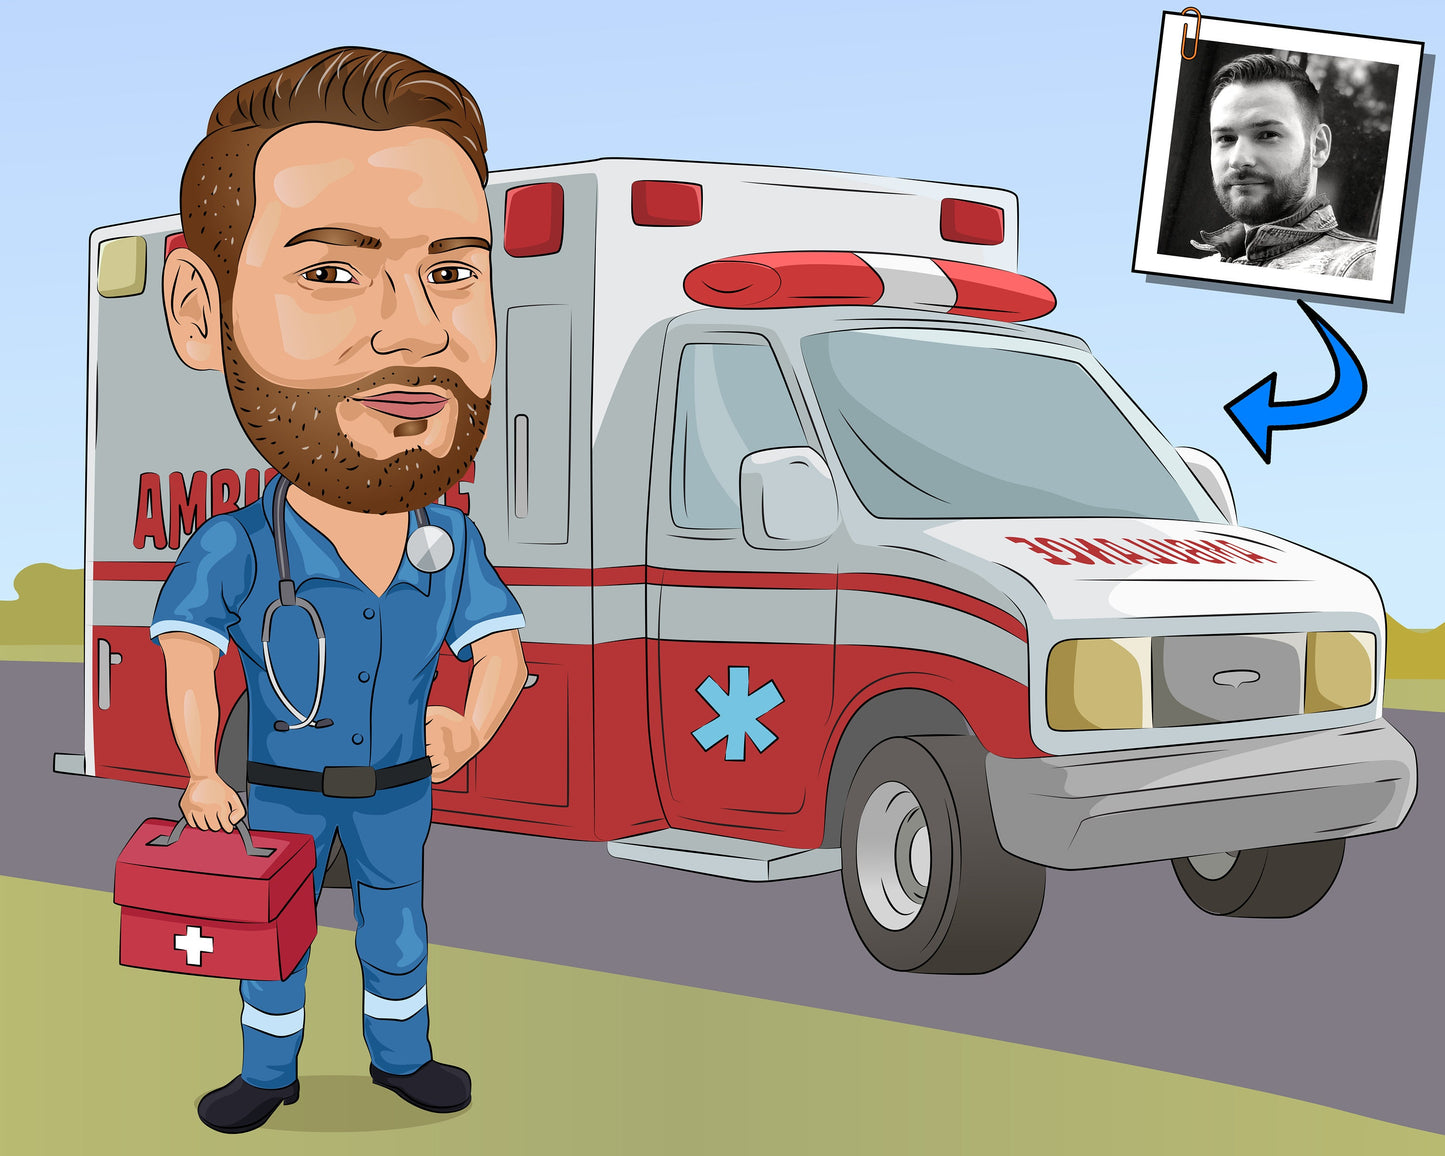 Emergency medical technician Gift - Custom Caricature From Photo, EMT gifts, First Responder gift